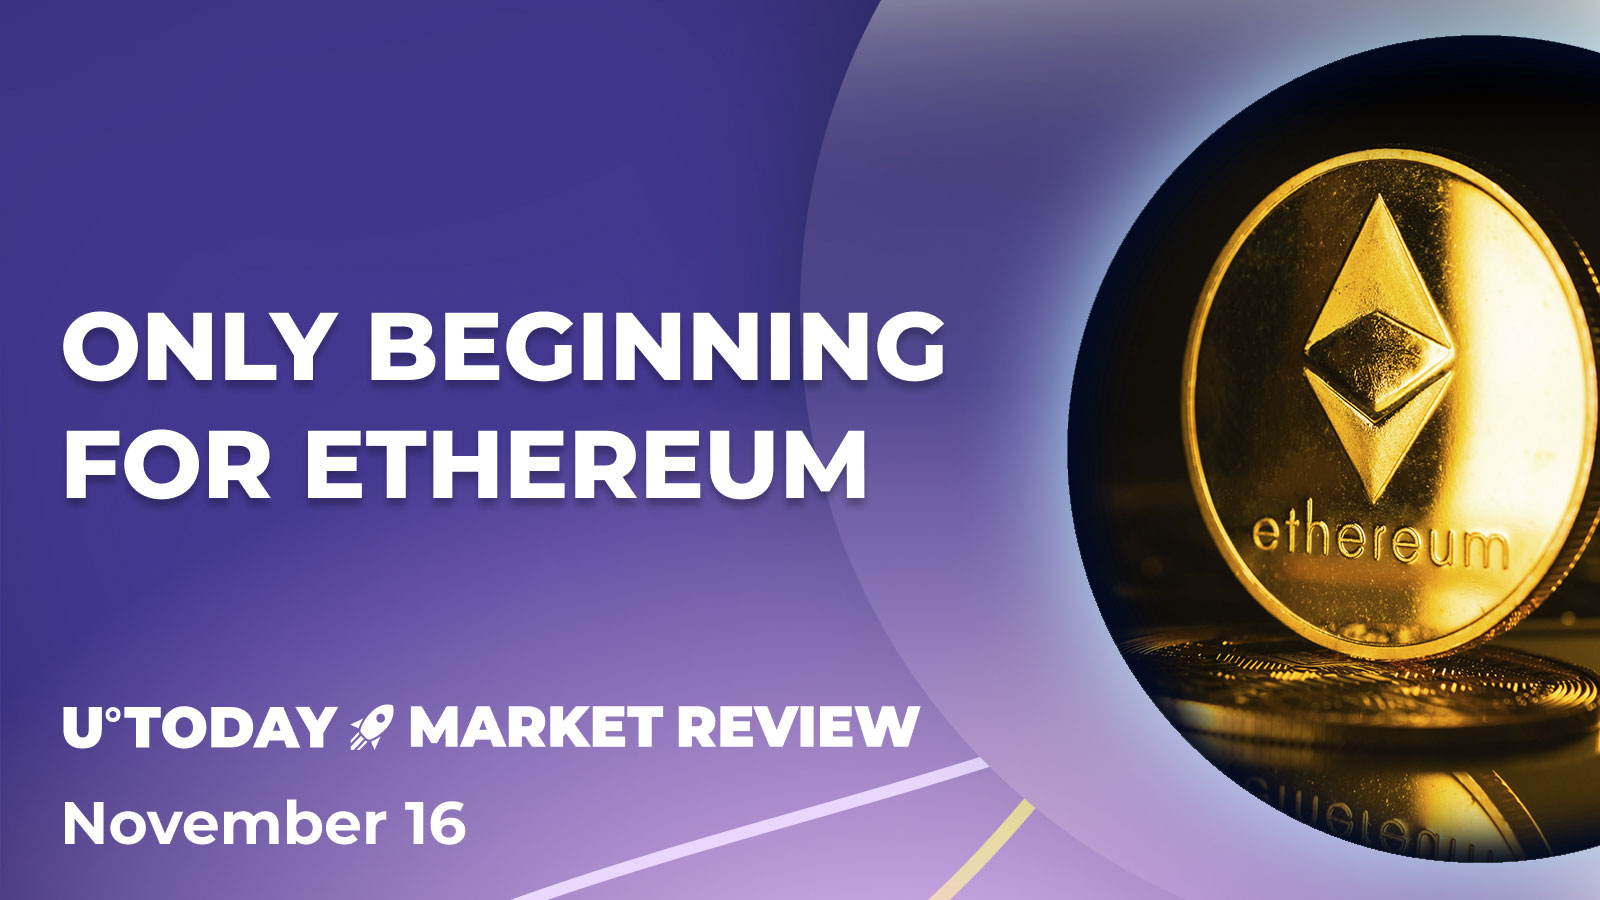 Ethereum’s (ETH) Rally: Prelude to Further Gains as Price Exceeds ,000 Again